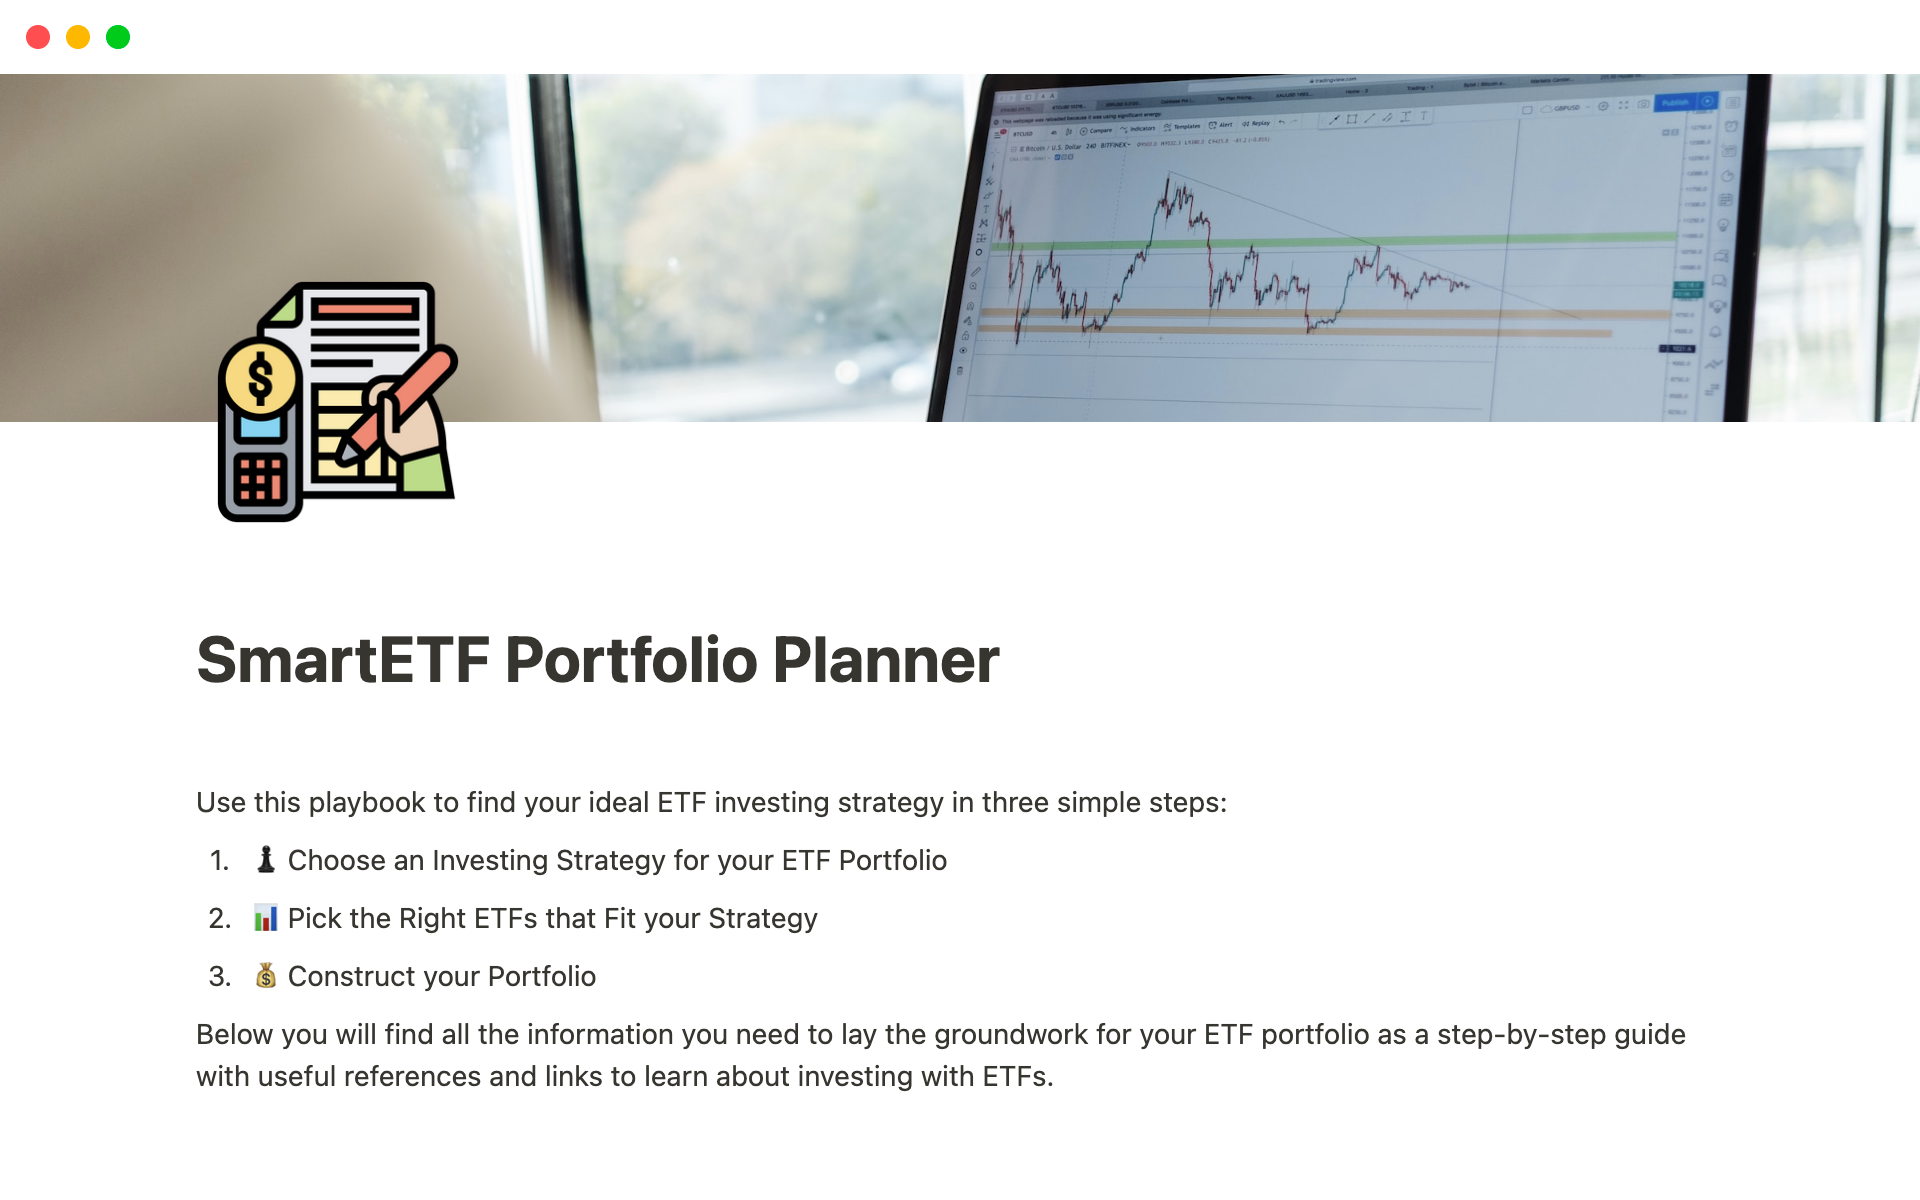 The planner provides a three-step guide to building an ETF portfolio, including choosing an investment strategy, selecting the right ETFs and multiple templates to experiment with different investment strategies.